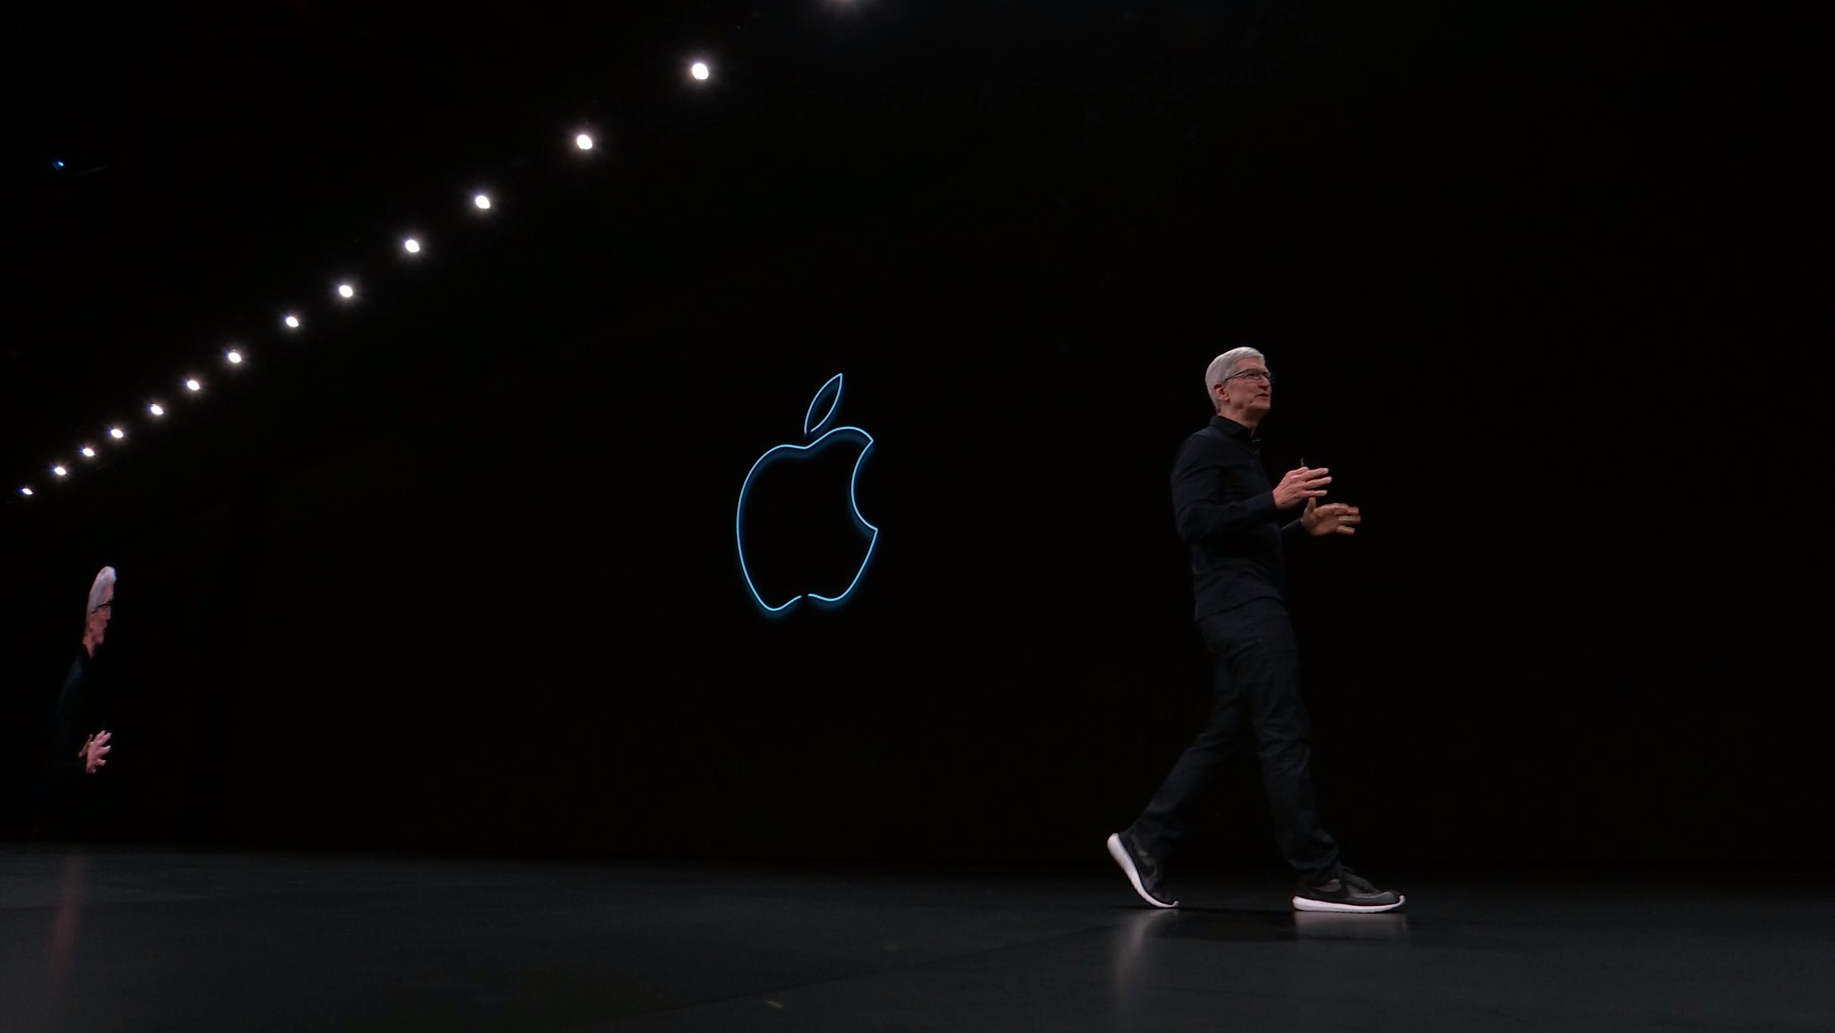 Tim Cook on stage at Apple WWDC 2019.